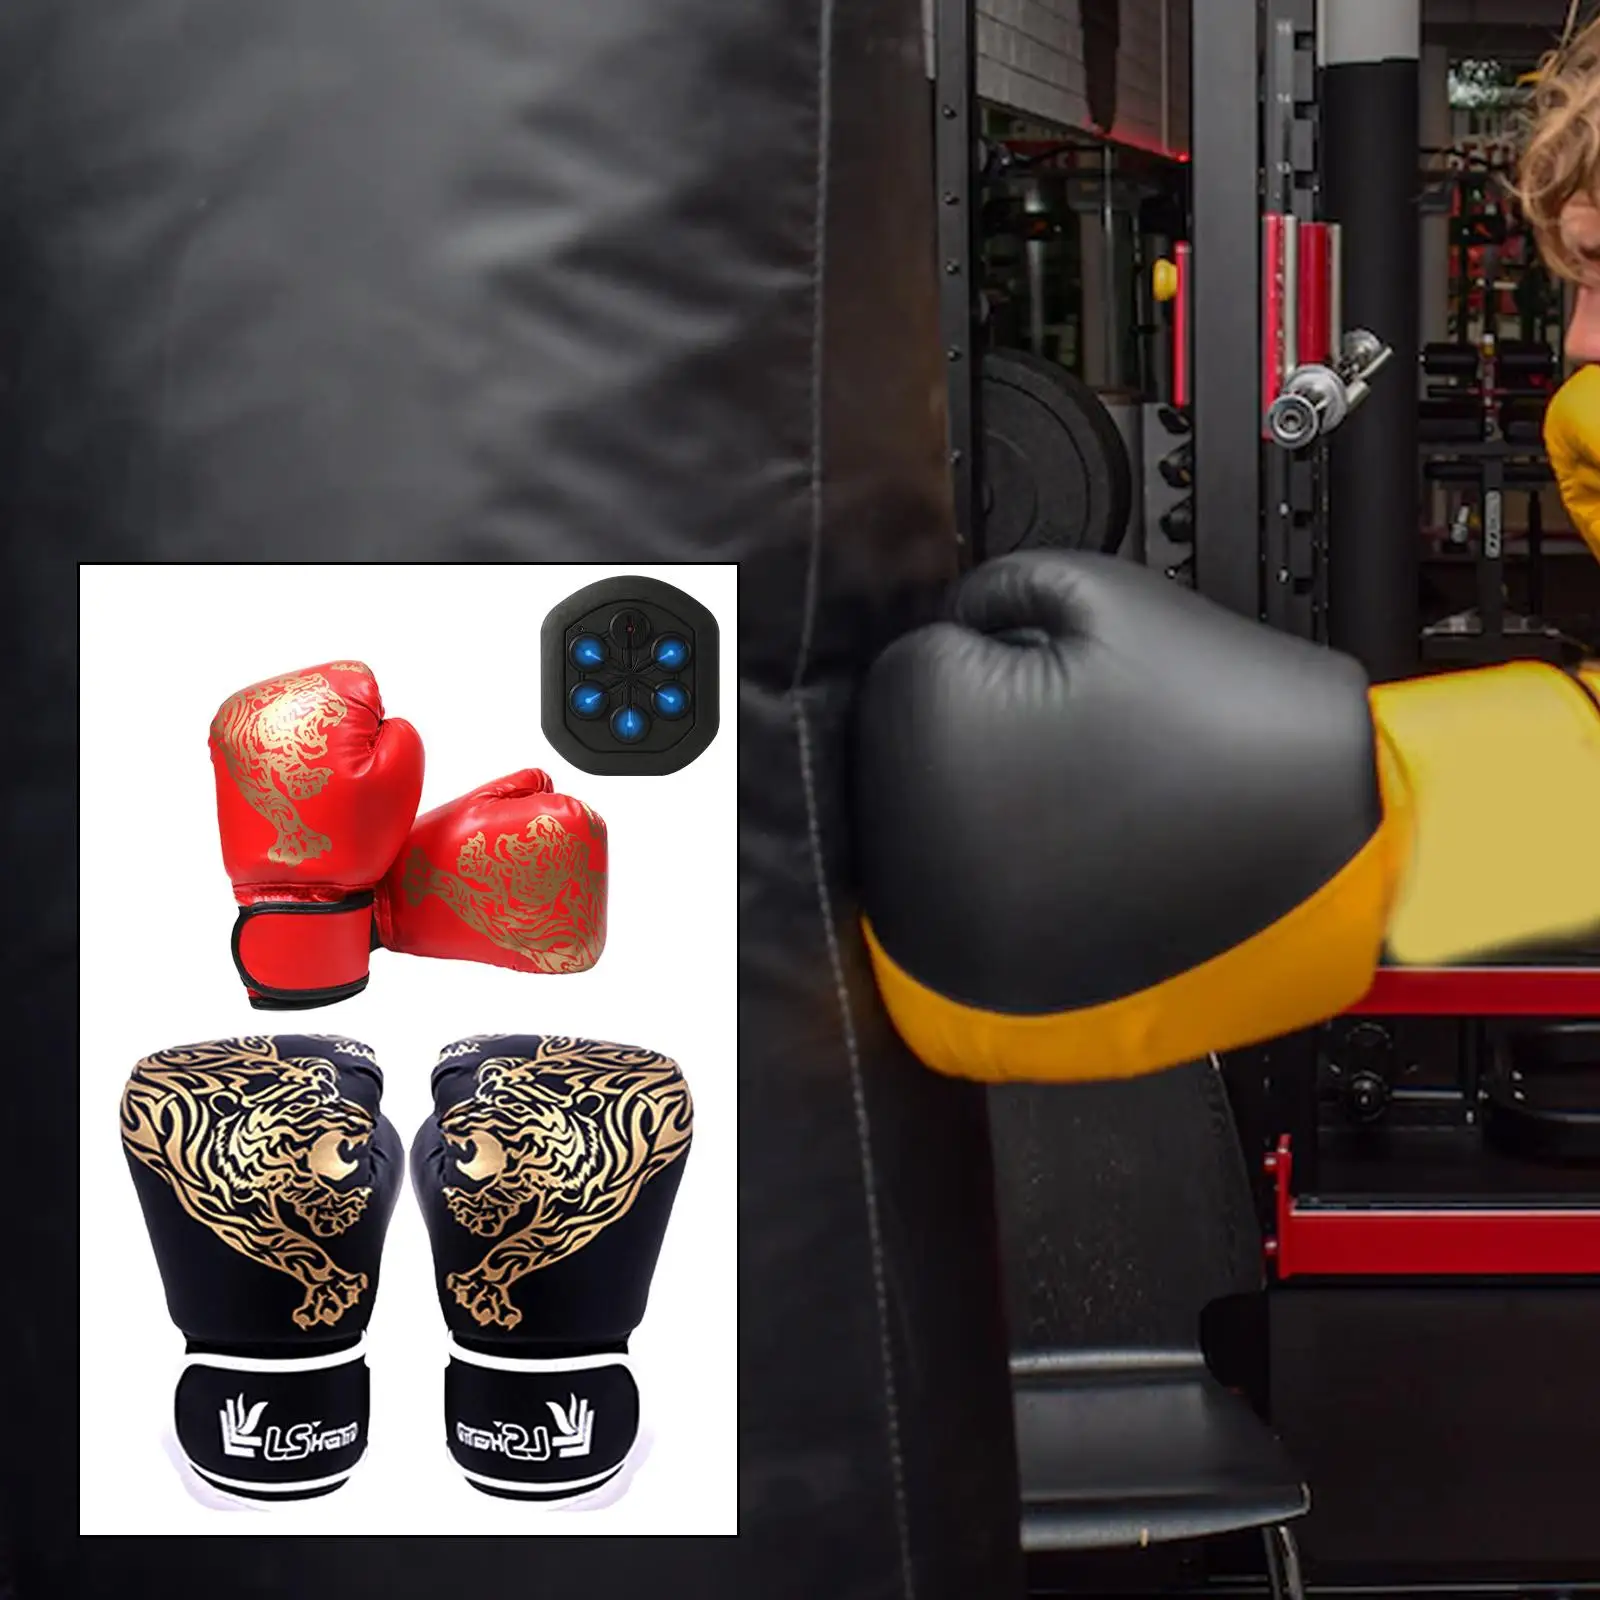 Music Boxing Wall Target Reaction Target Machine Wall Mounted Boxing Practice Training Equipment